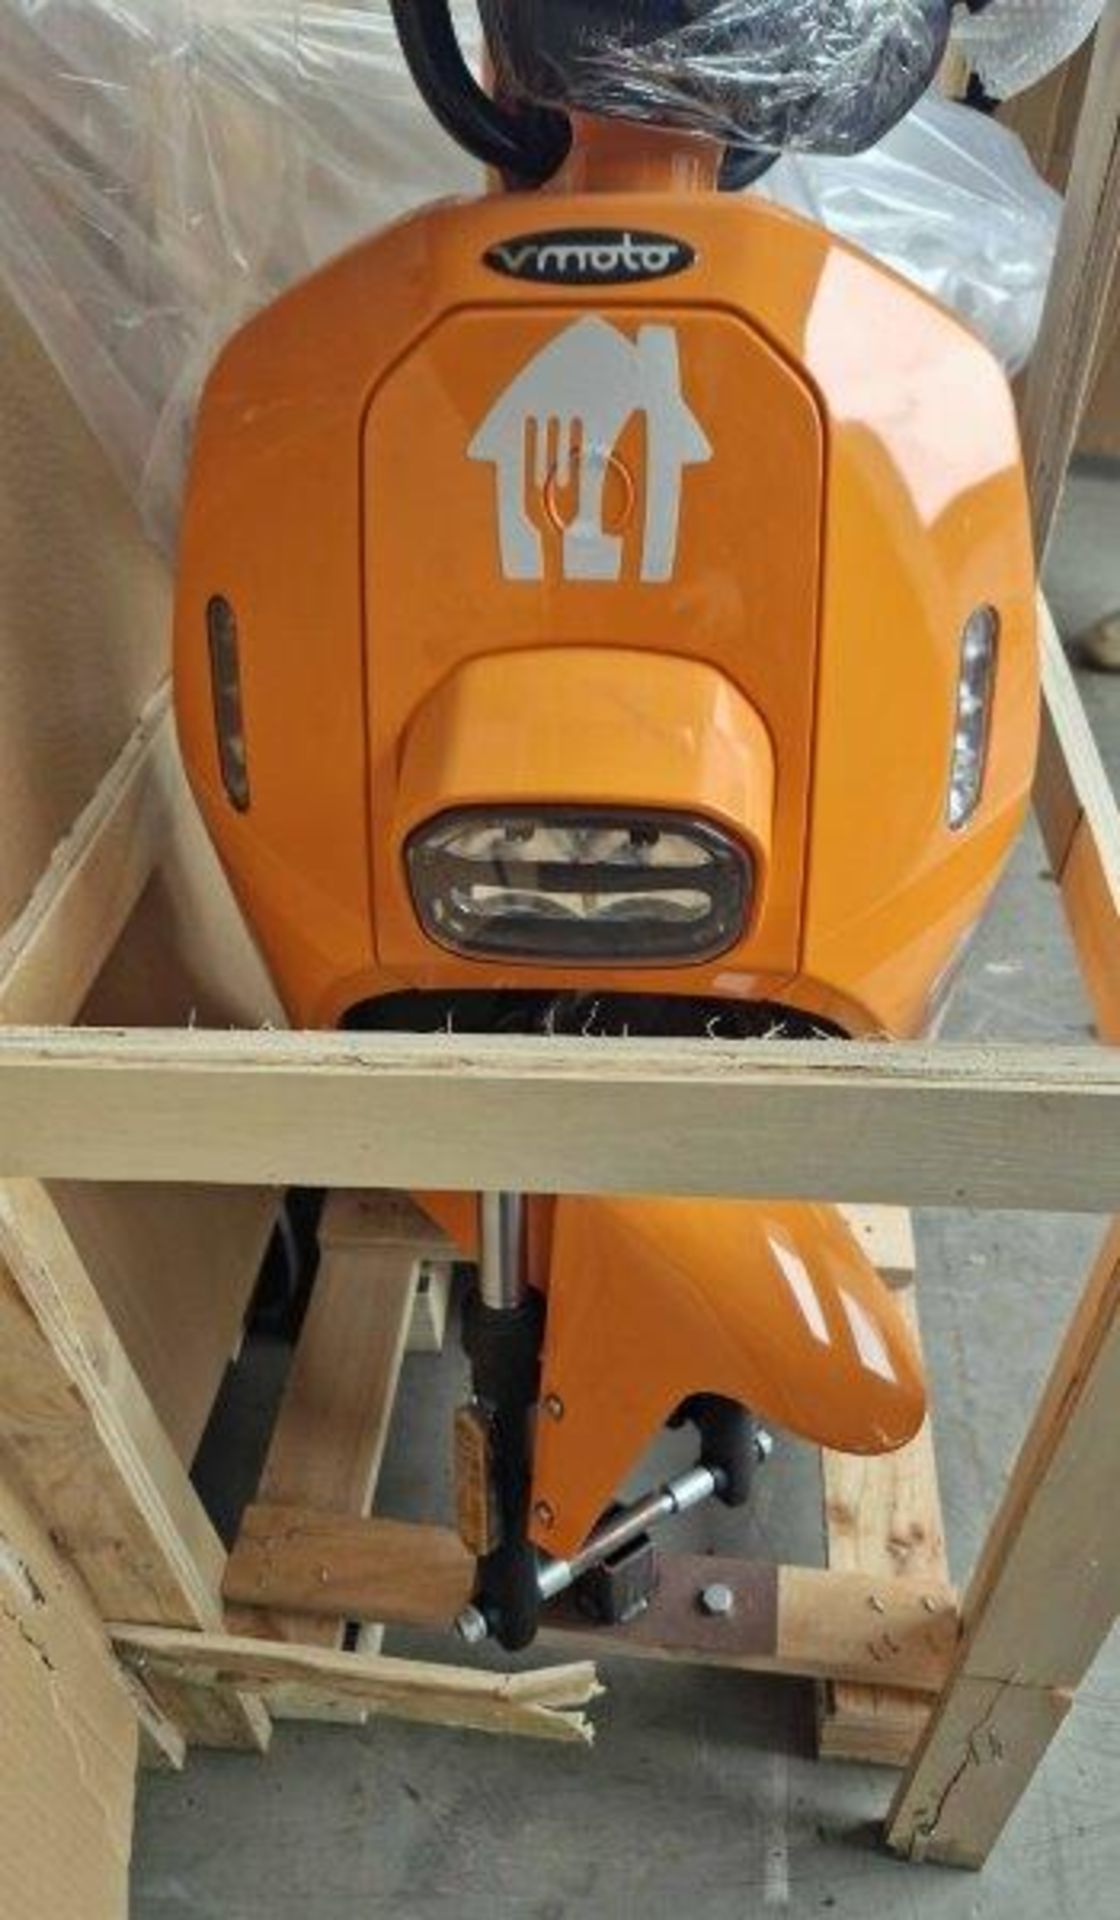 VMOTO VS2 L1e-b Electric Moped in Orange. Boxed, Unused and Unregistered, requiring some assembly, - Image 8 of 11